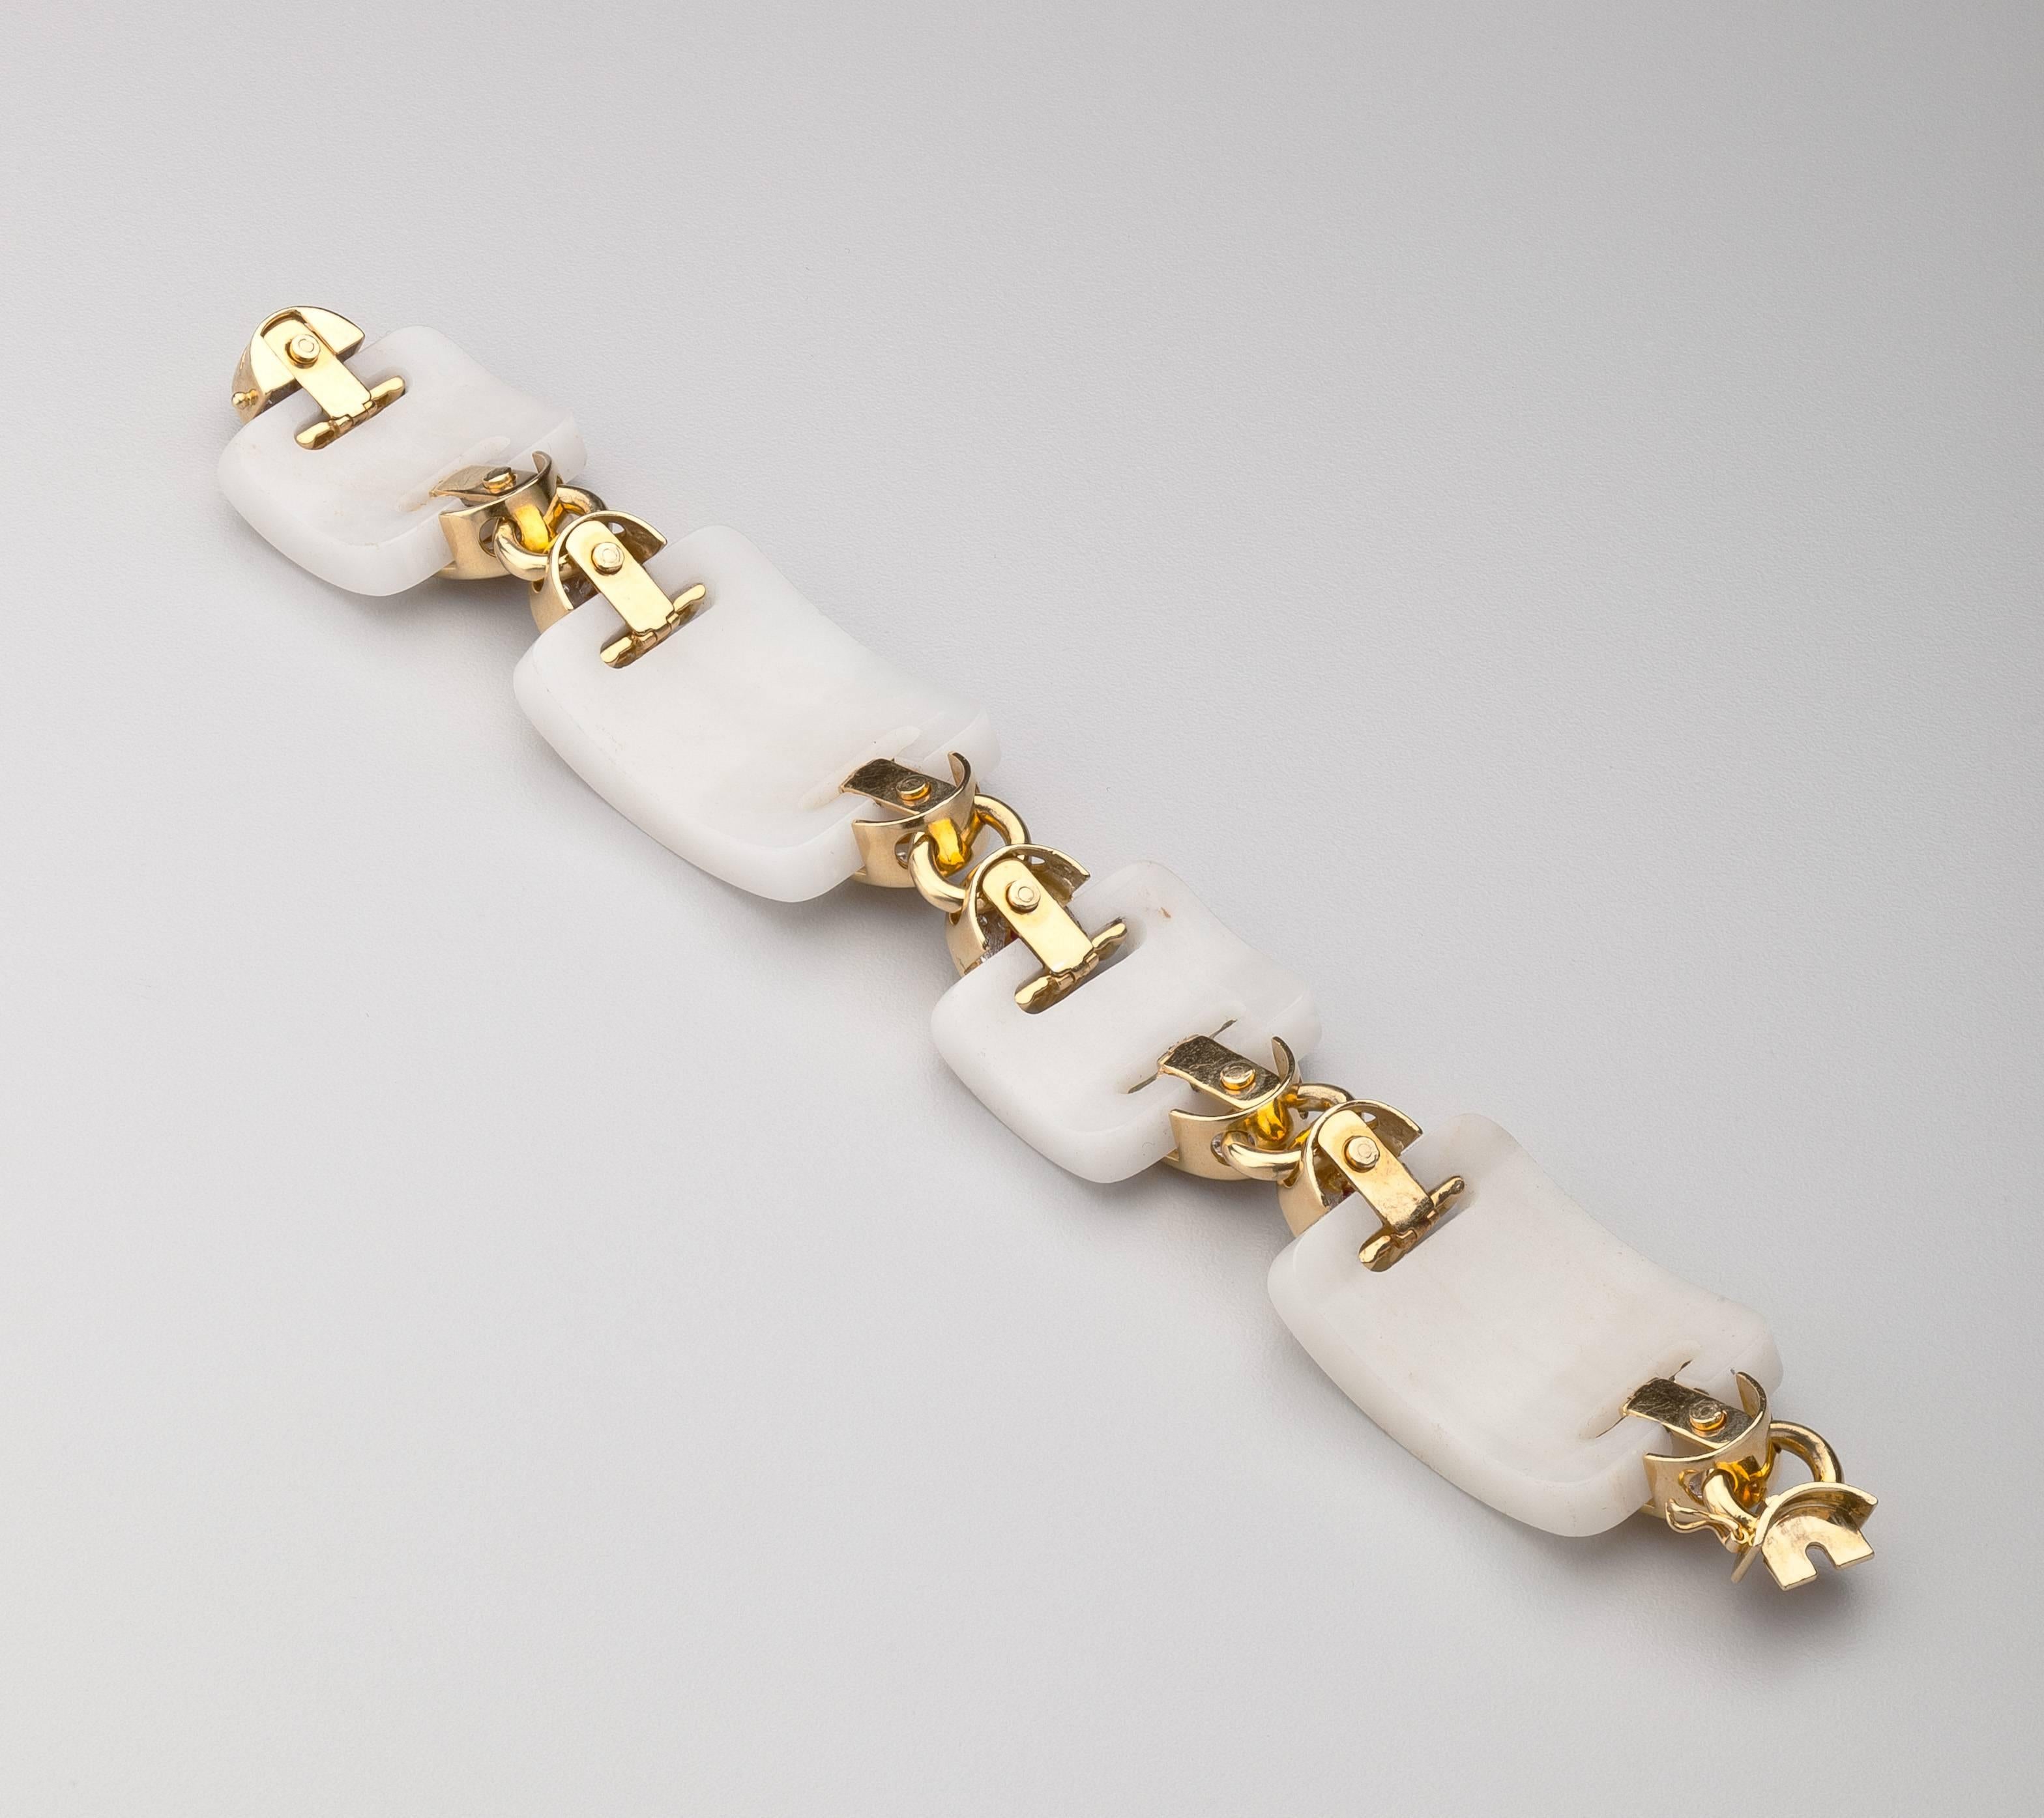 An 18 karat gold white onyx link bracelet with arched panels of onyx highlighted with diamonds and rubies. The eight rubies are beautifully matched cabochons, the 188 diamonds accent the white onyx. Unusual and very chic.  